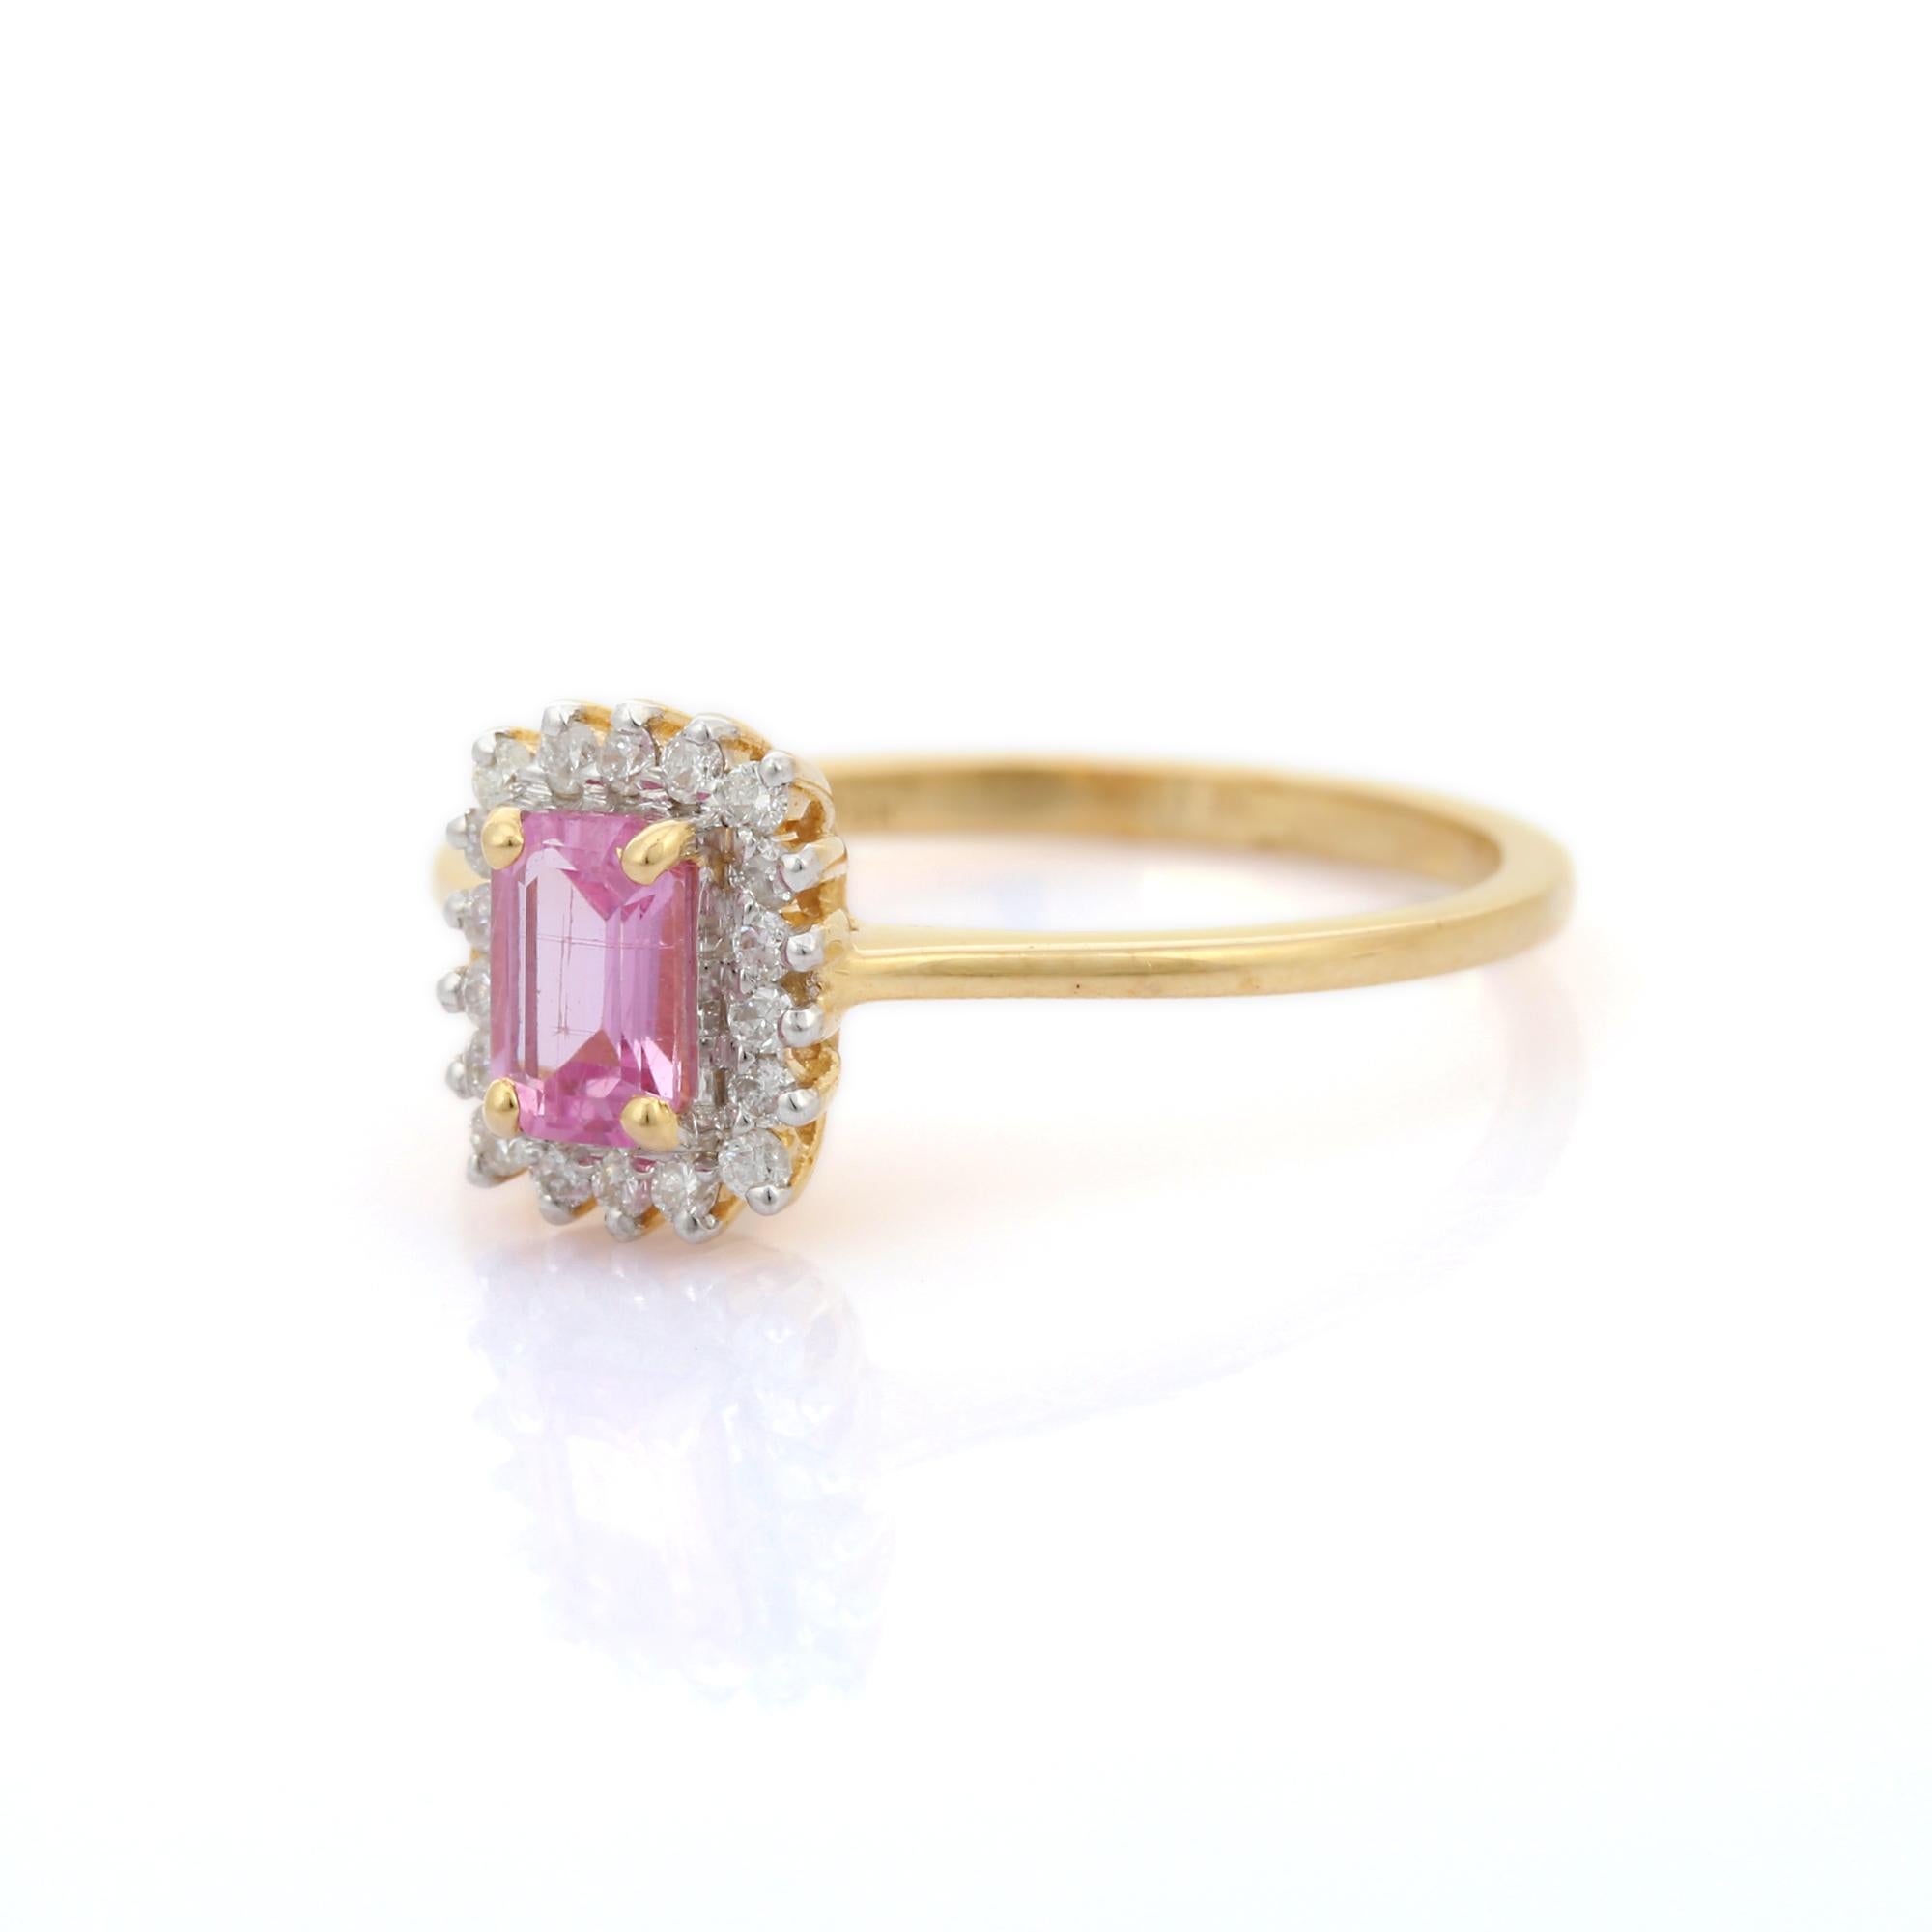 For Sale:  Minimalist Pink Sapphire Halo Diamond Bridal Ring in 14K Solid Yellow Gold 3